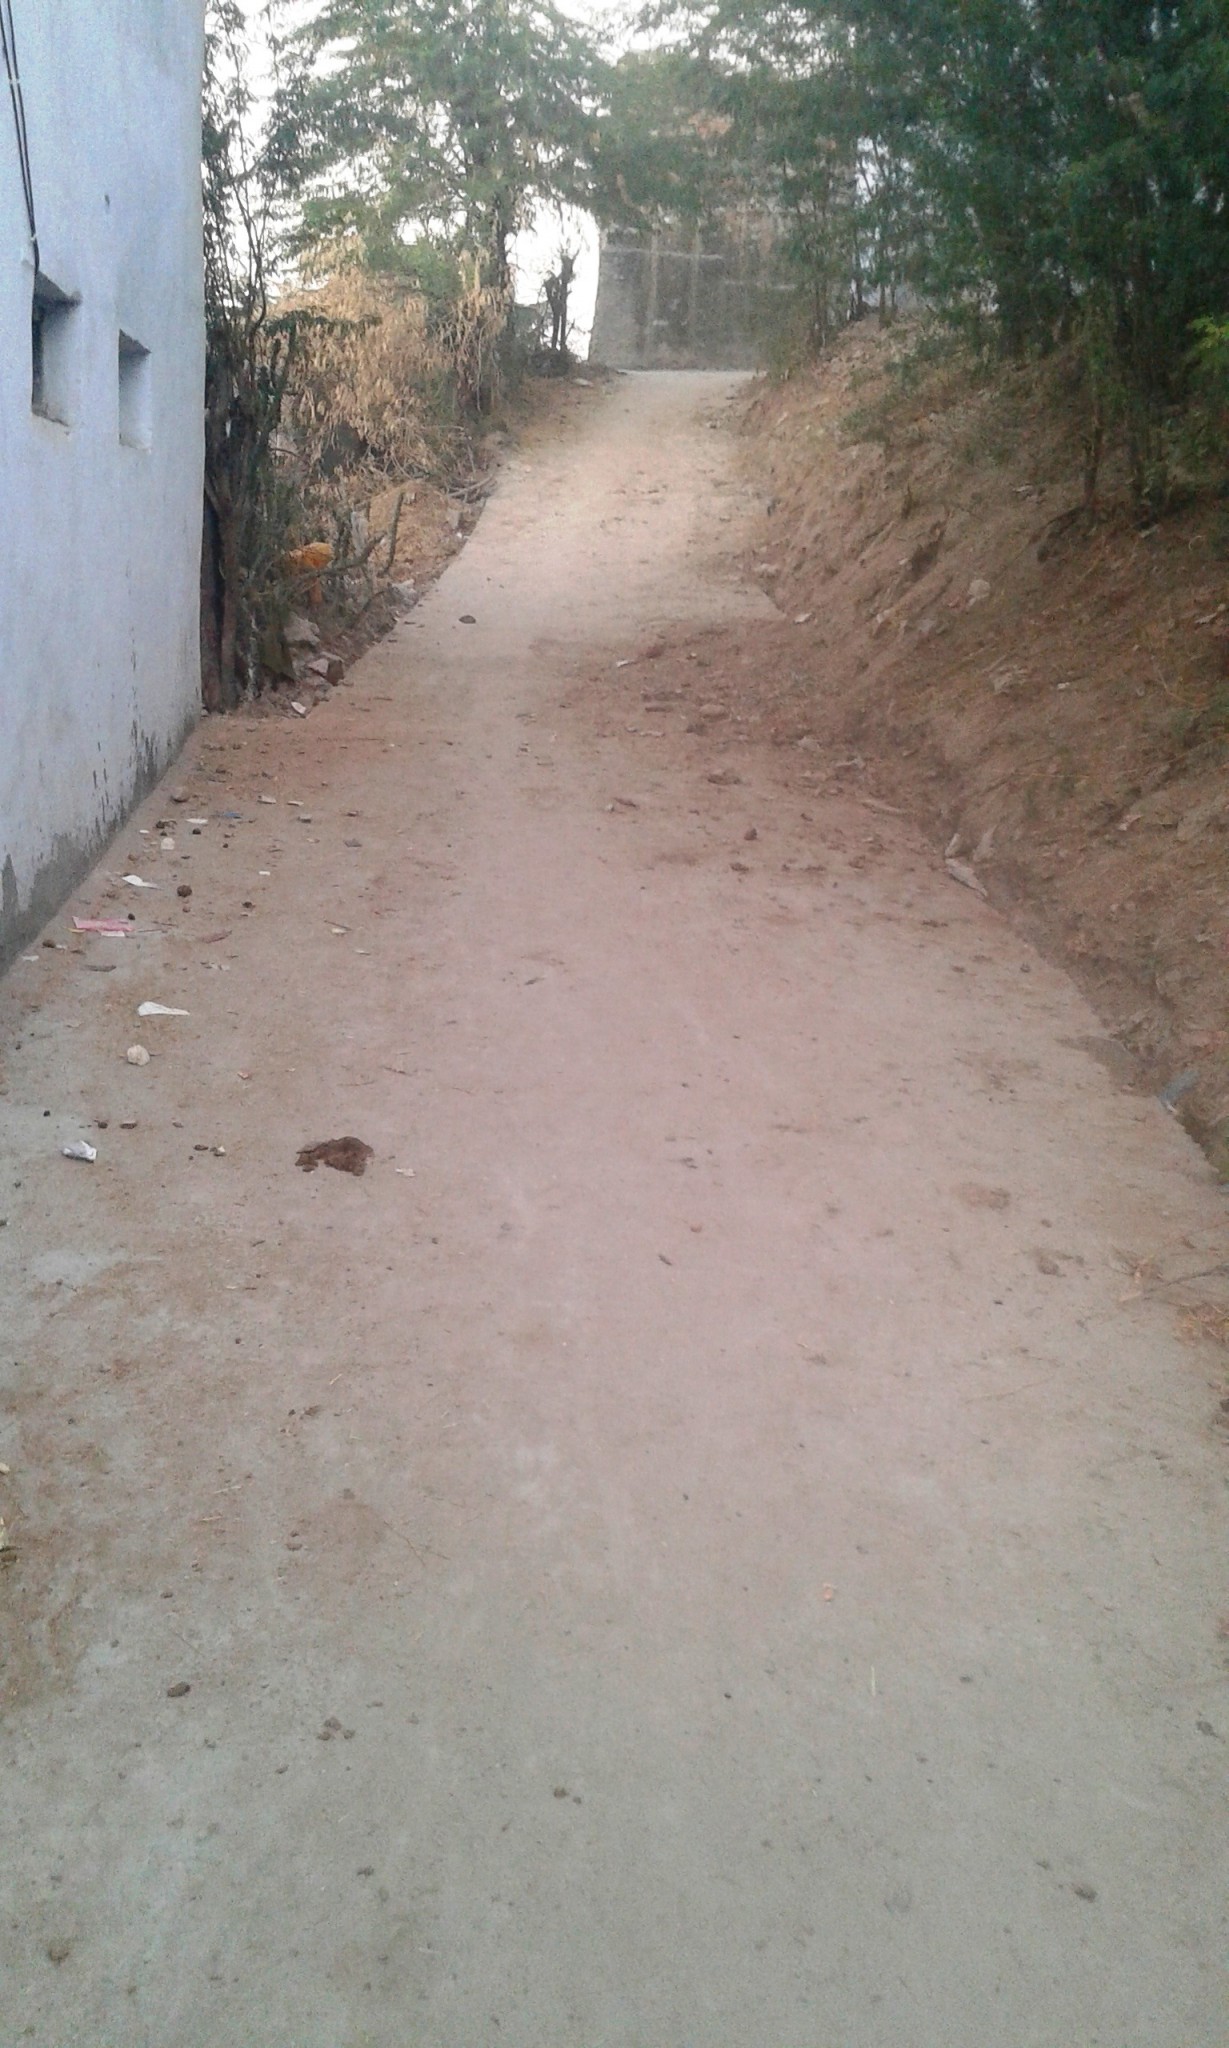 The once unpaved roads in Pachhmata have now been properly laid out. (Credit: Rakesh Kumar\WFS)